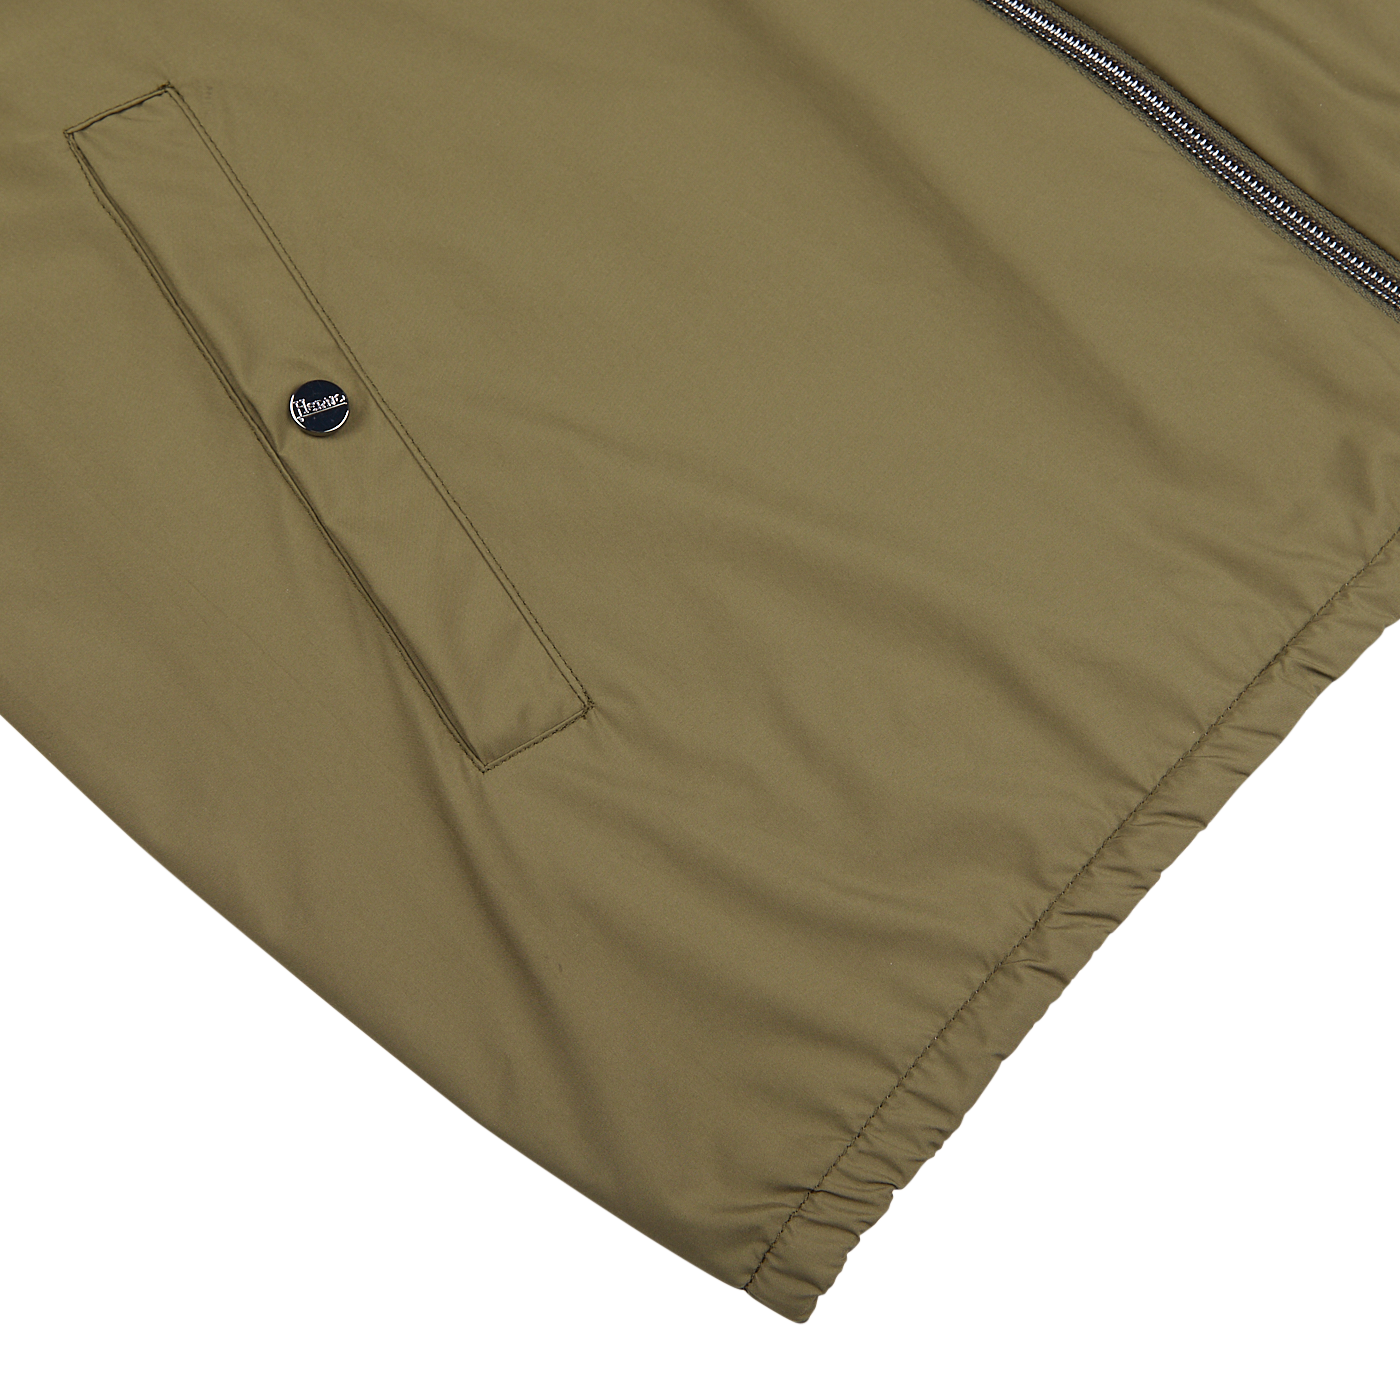 Close-up view of a Herno water-resistant nylon olive green jacket featuring a zipper and a small pocket with a logo patch on a white background.